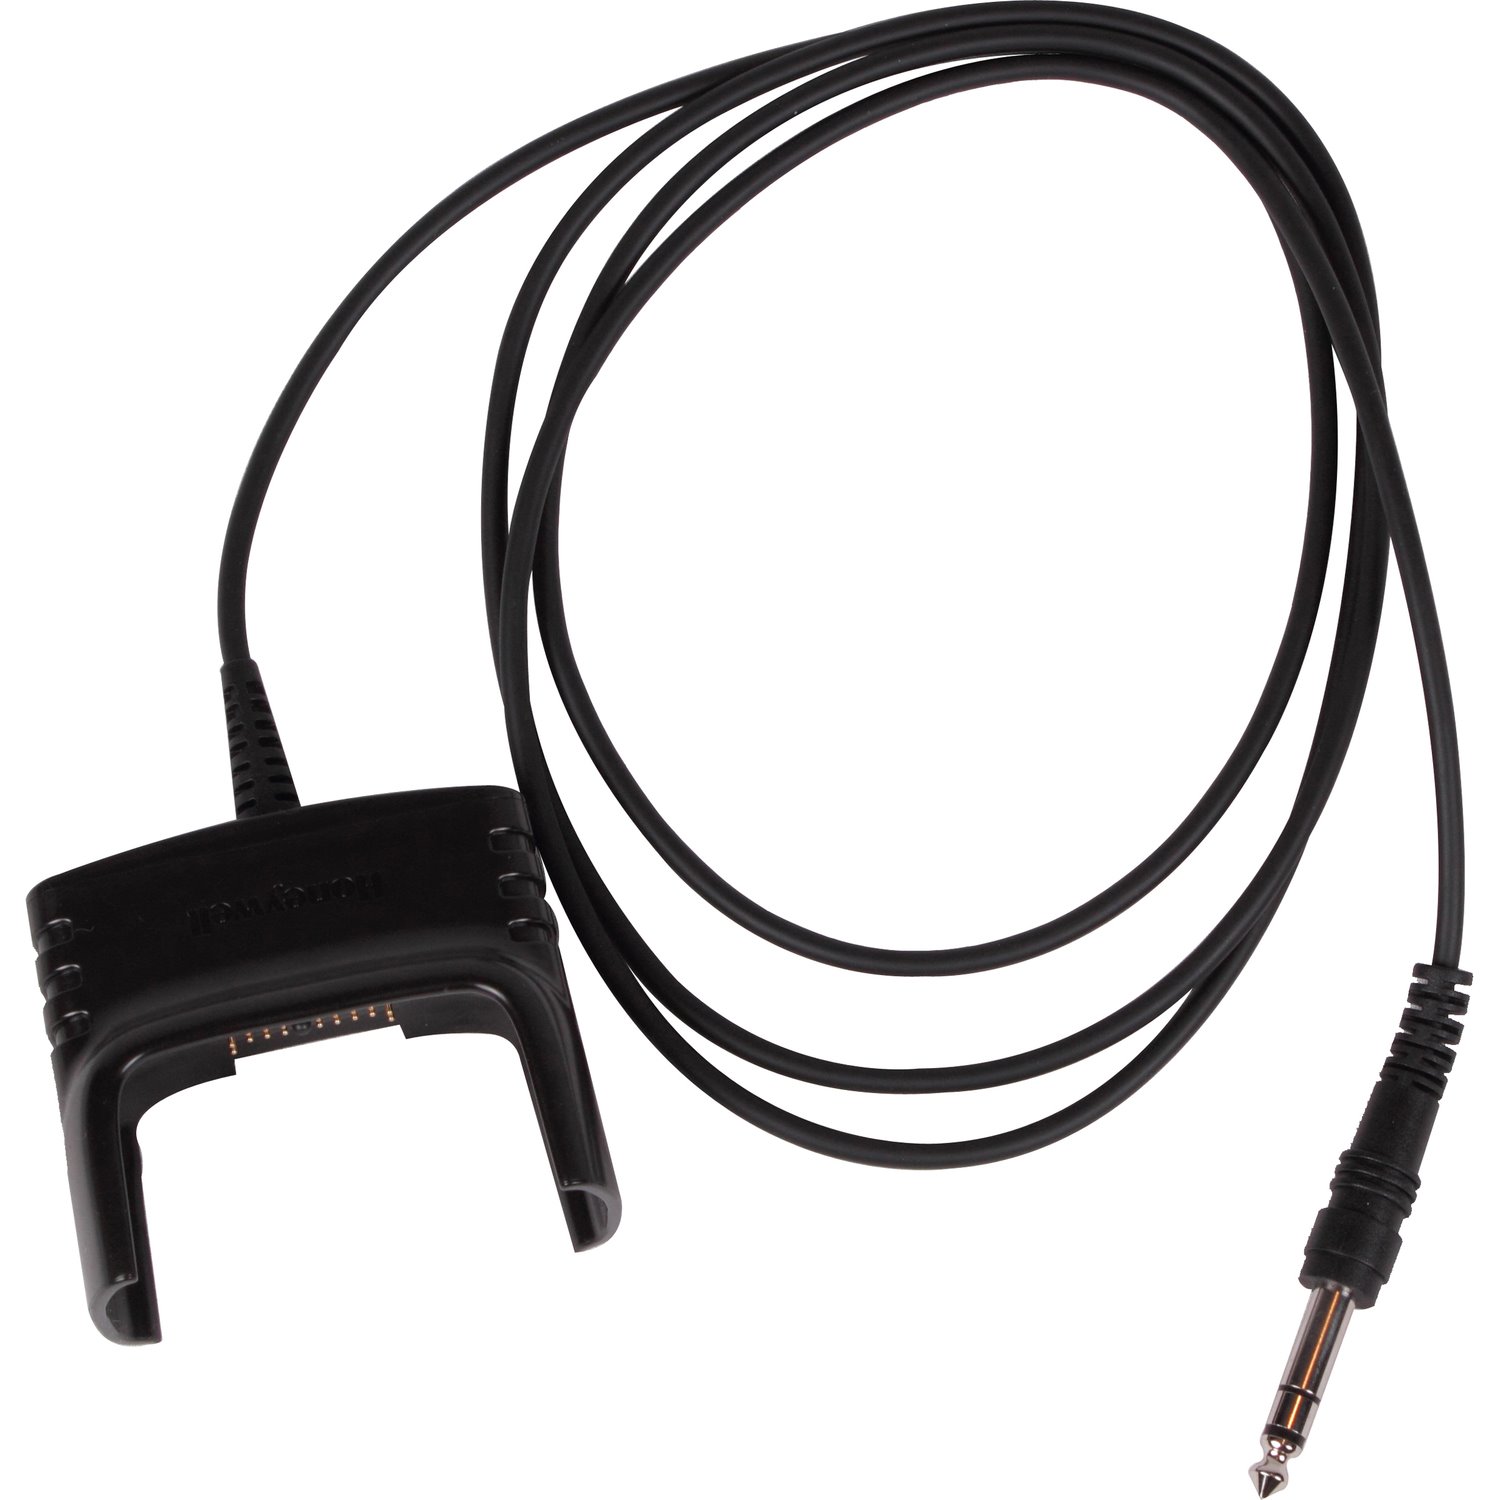 Honeywell Data Transfer Cable for Handheld Terminal